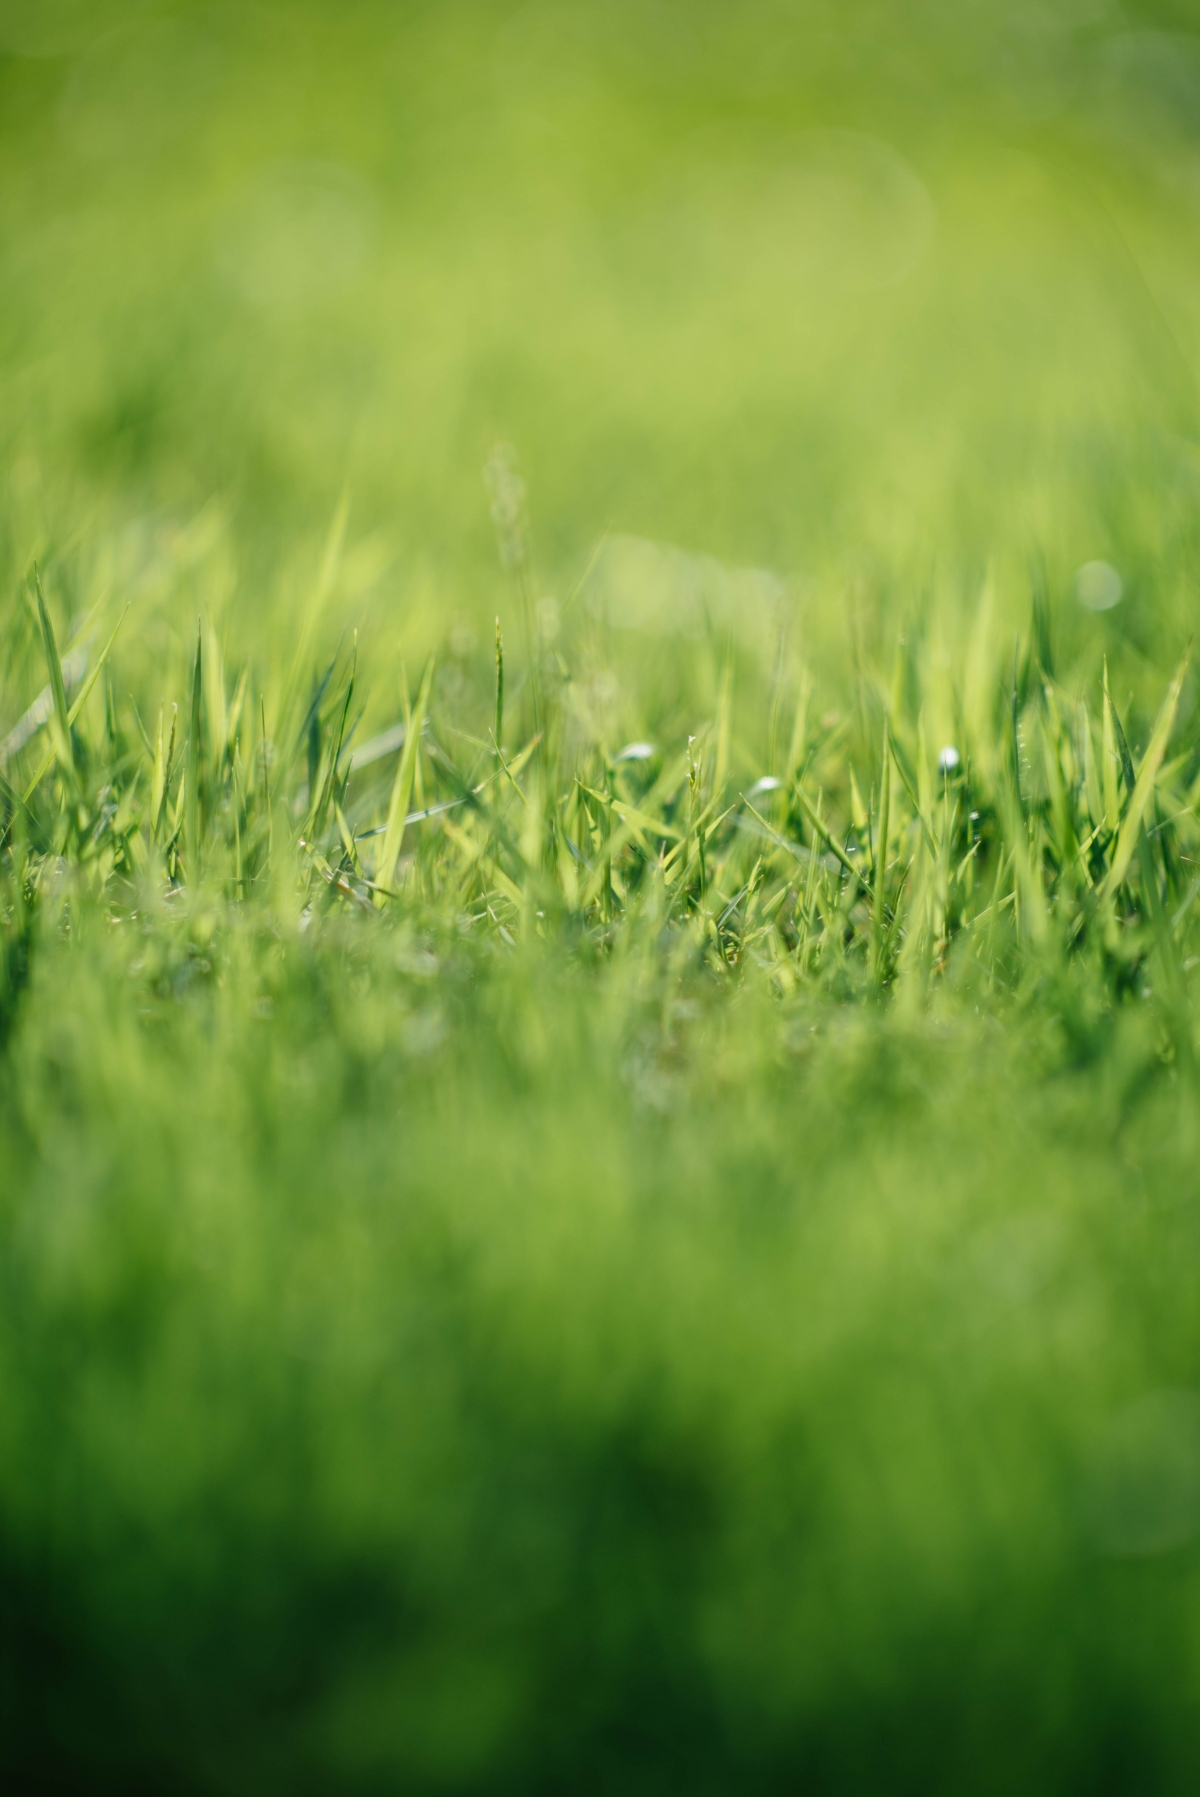 How To Get Thick Grass And A Lush Lawn: 5 Simple Tips